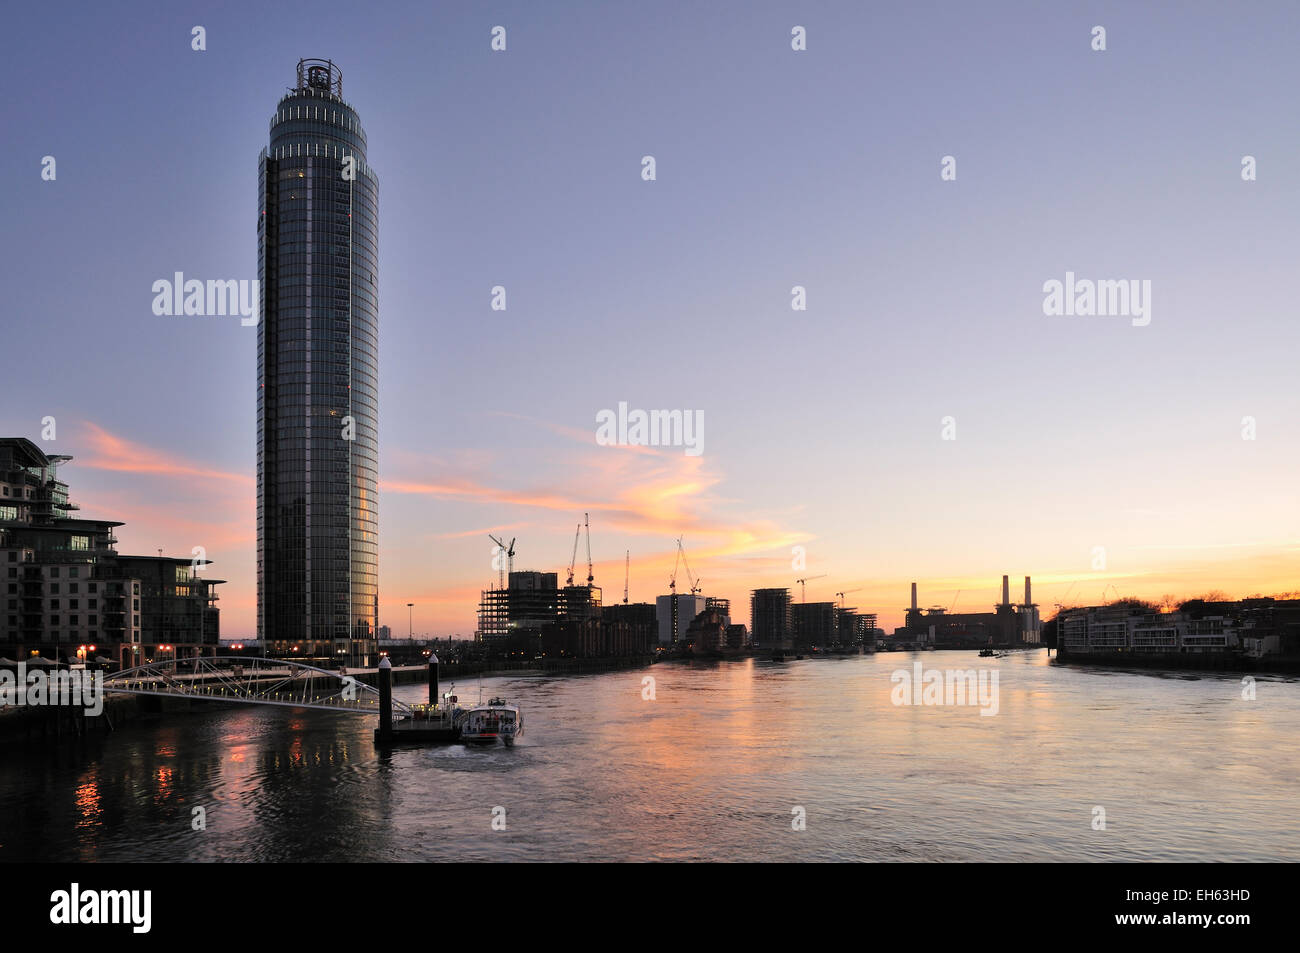 River Thames London UK from Vauxhall Bridge at dusk, with St Georges Wharf Tower in foreground Stock Photo